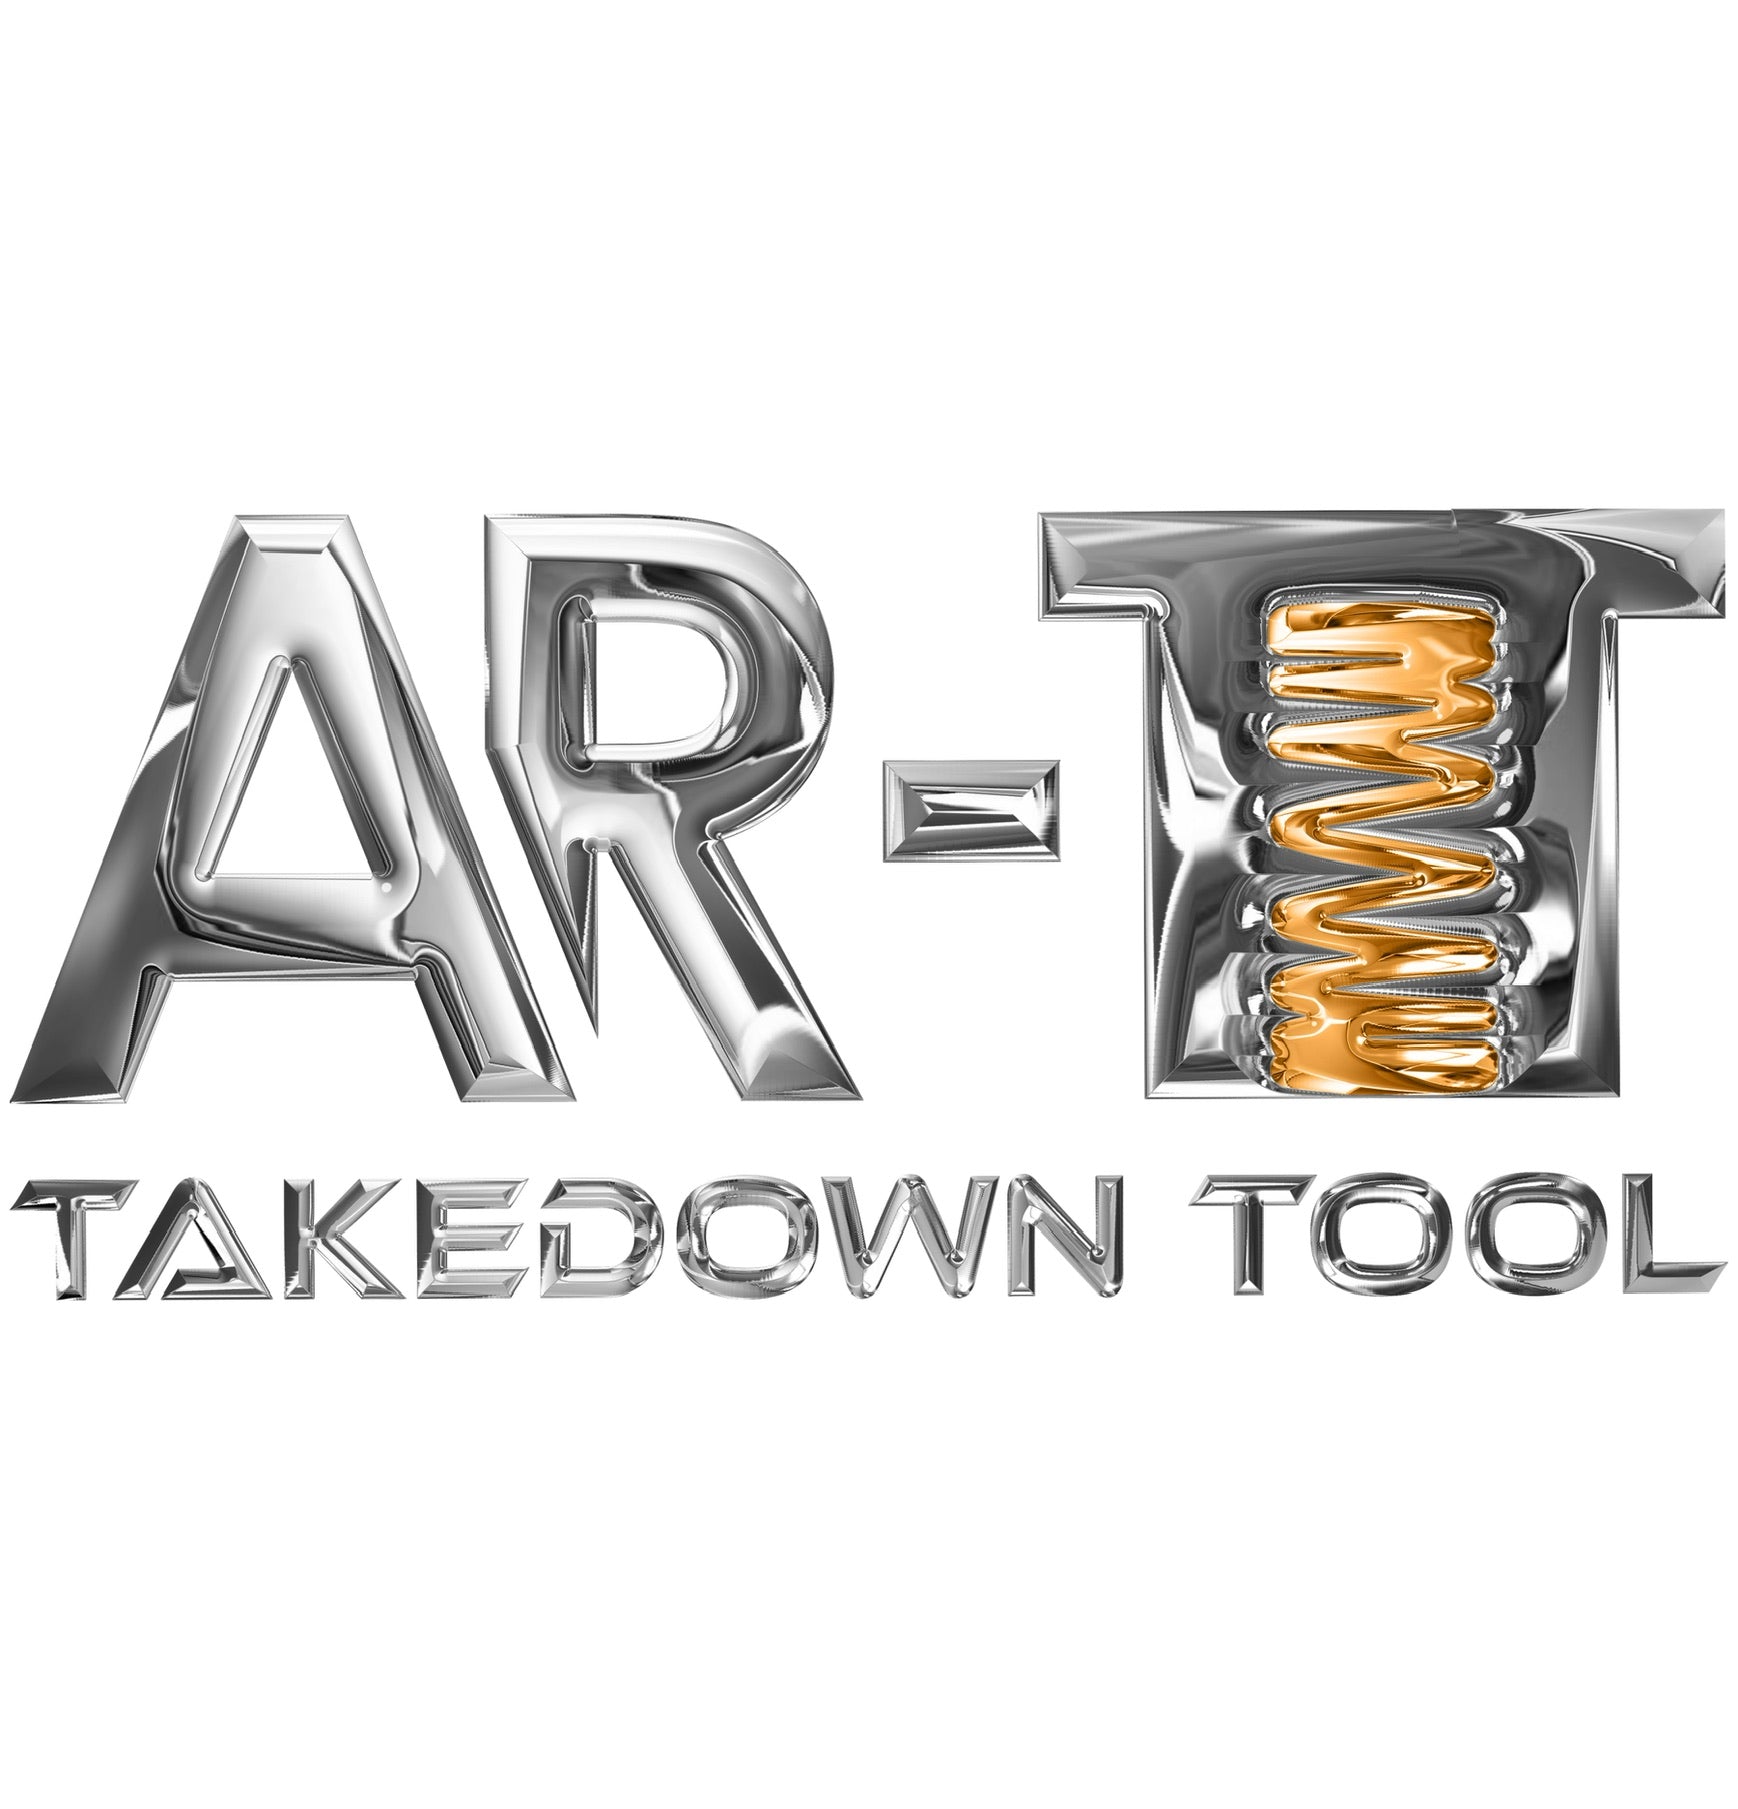 The Takedown Tool company, GET SPRUNG Apparel have partnered with Public SQ.